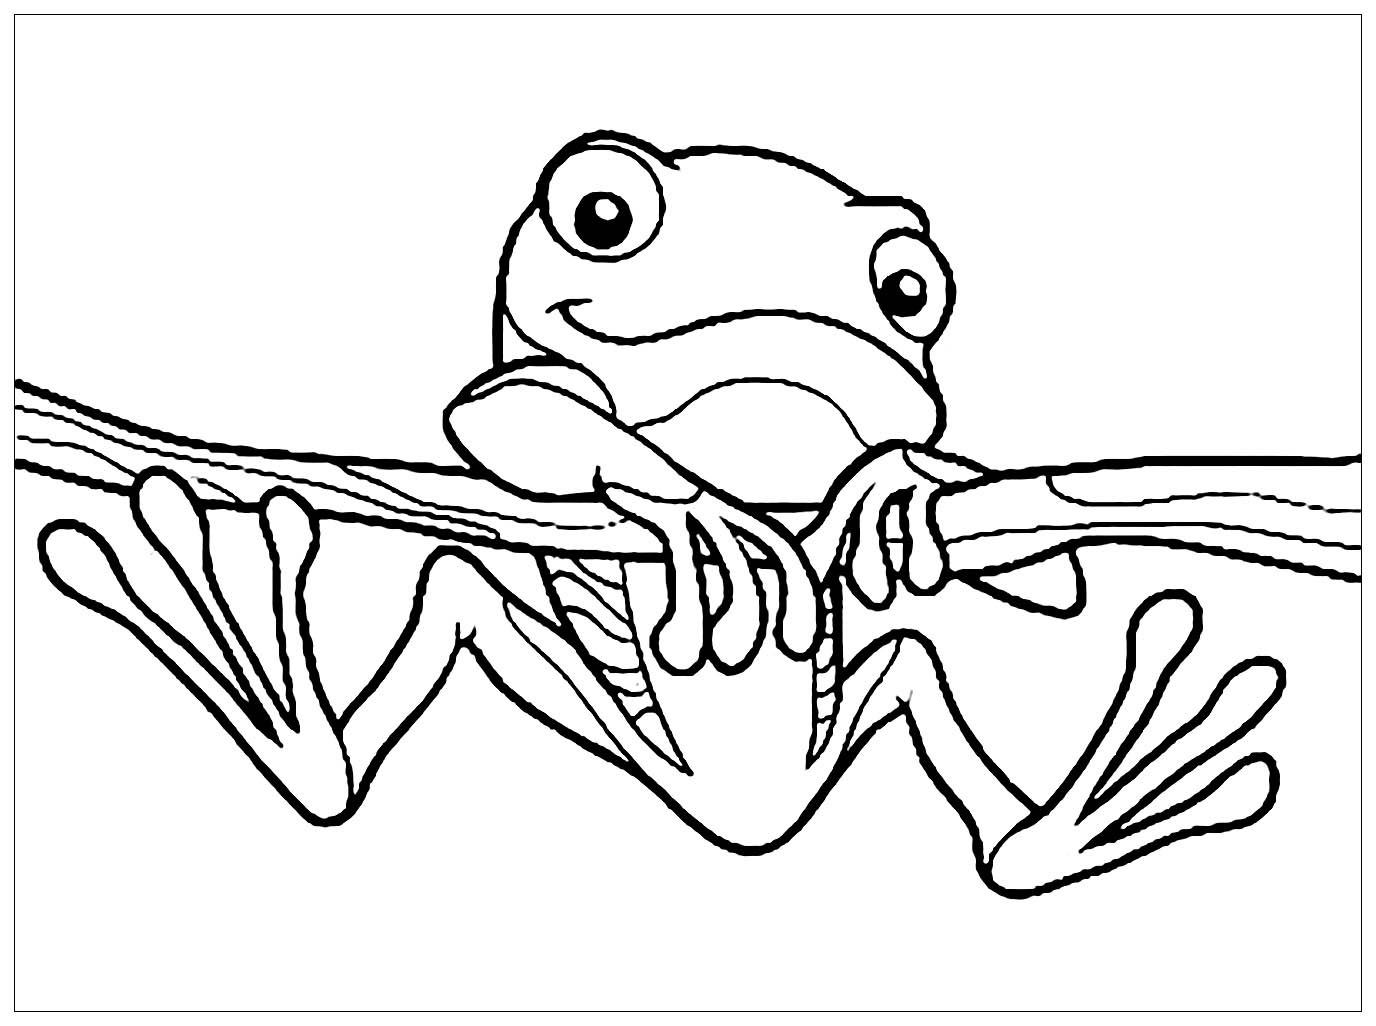 Frogs to color for kids   Frogs Kids Coloring Pages